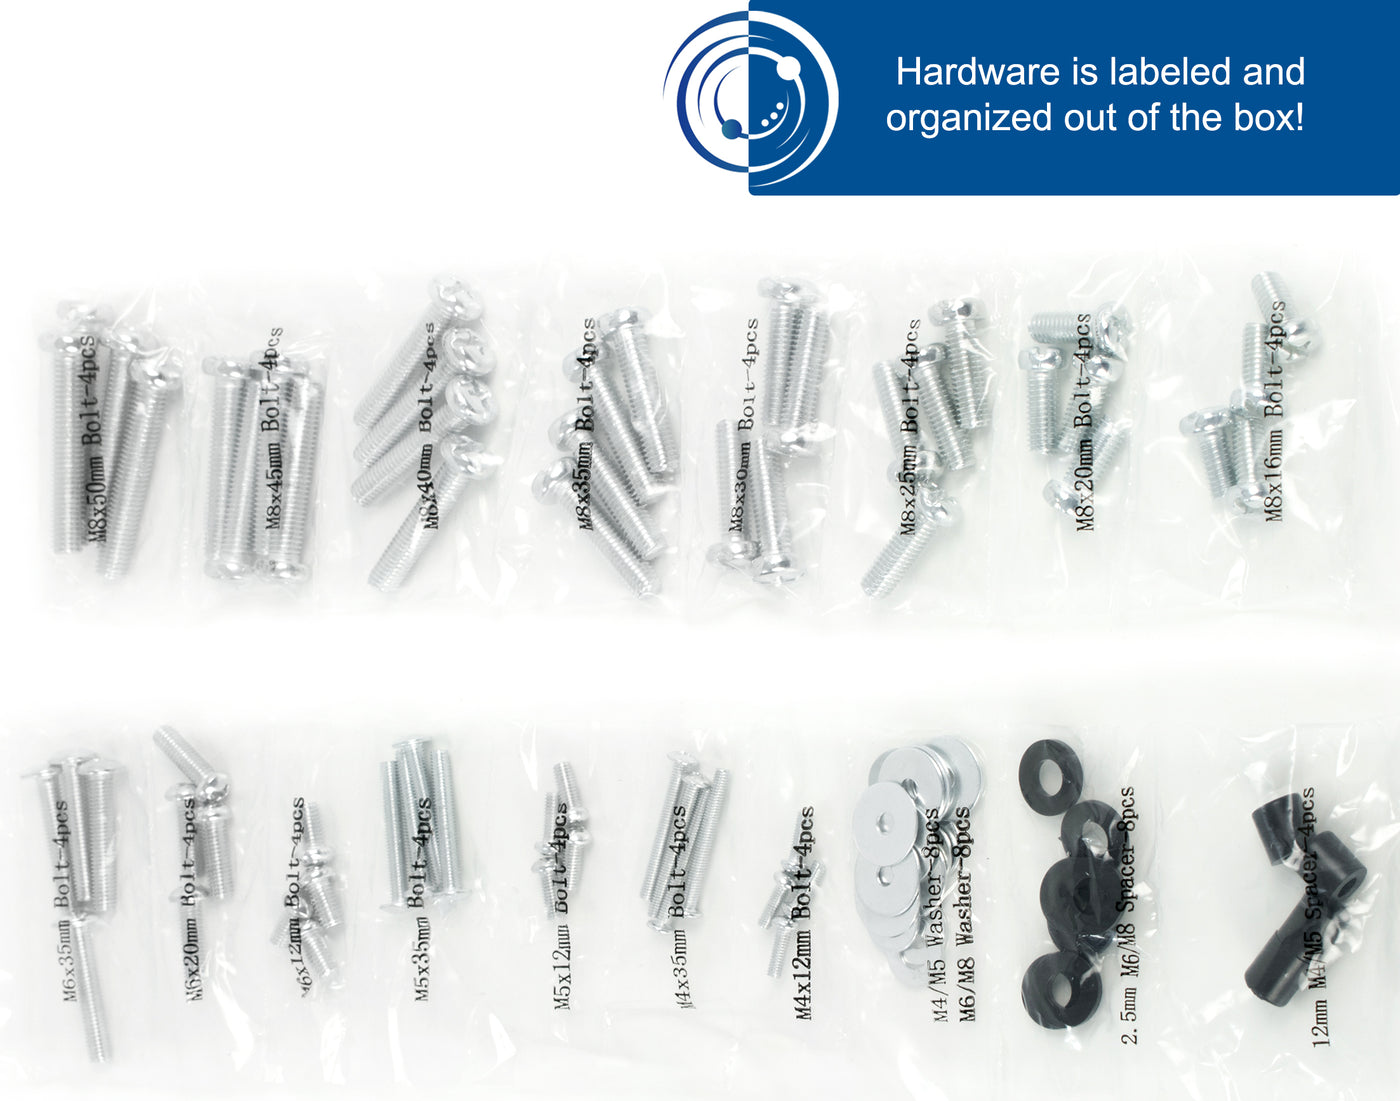 Organized and labeled packaging of hardware is included to make life easier.